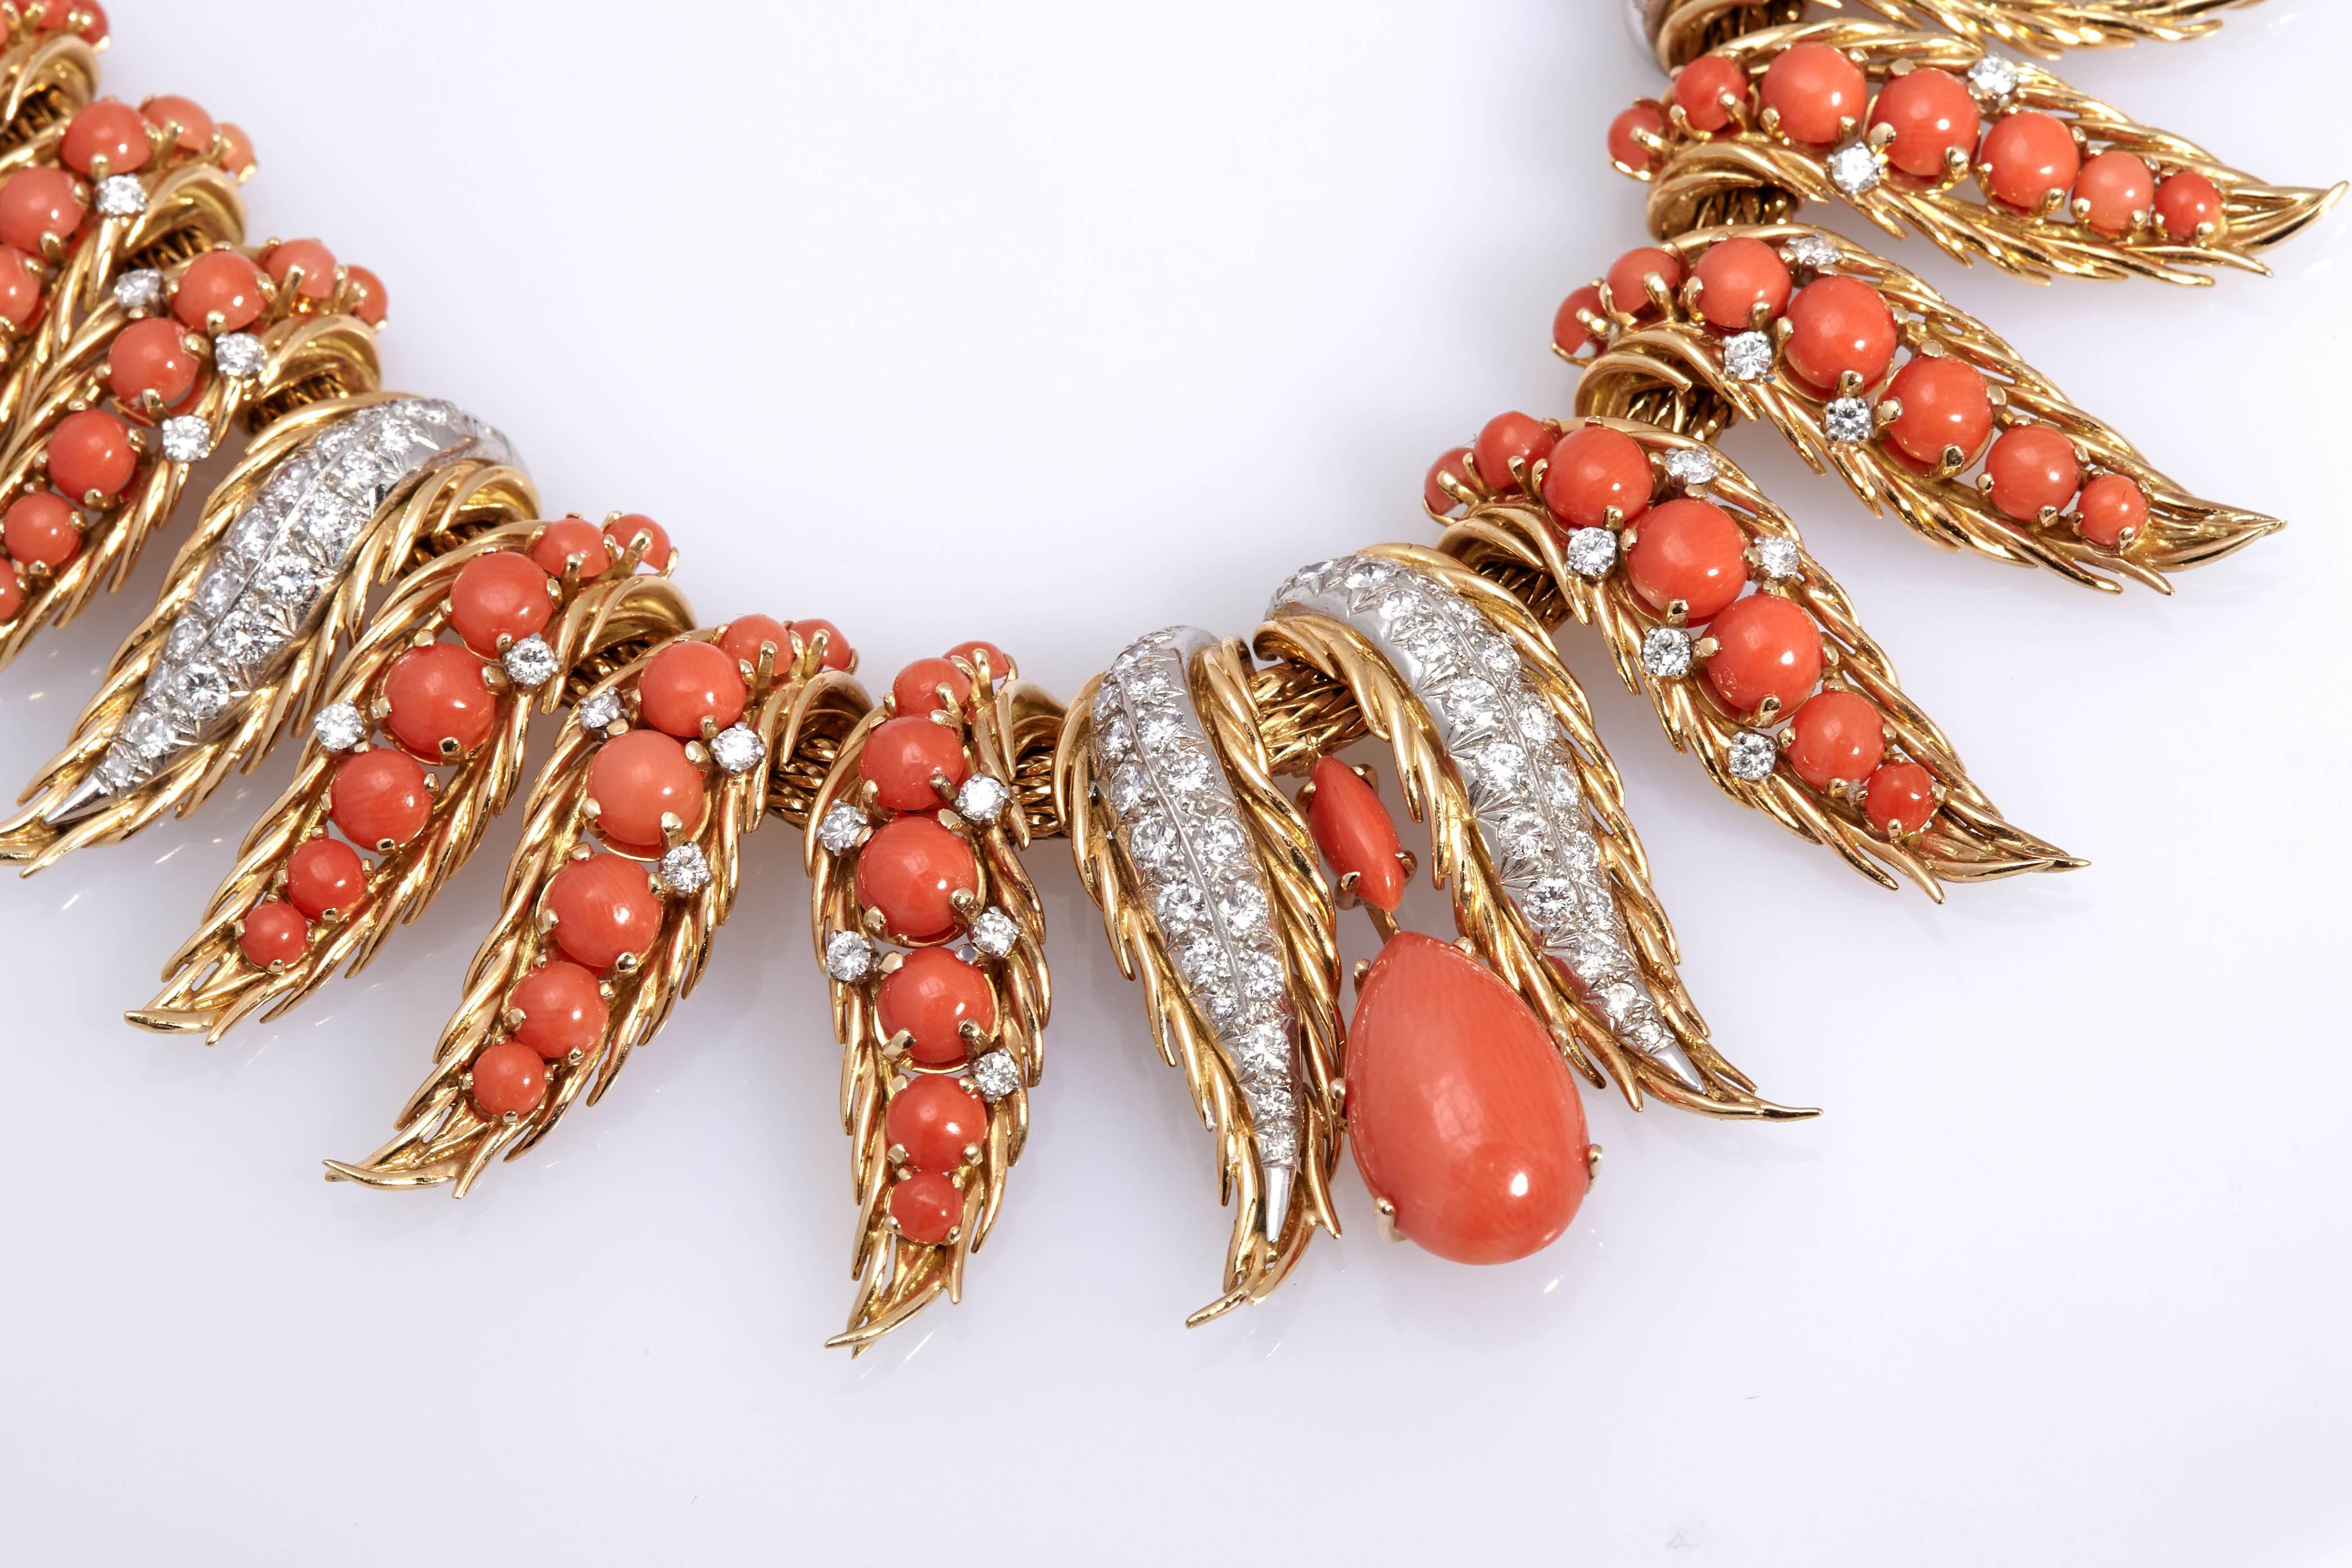 A Retro necklace in 18kt yellow gold with corals and diamonds. Made in France, circa 1950s.